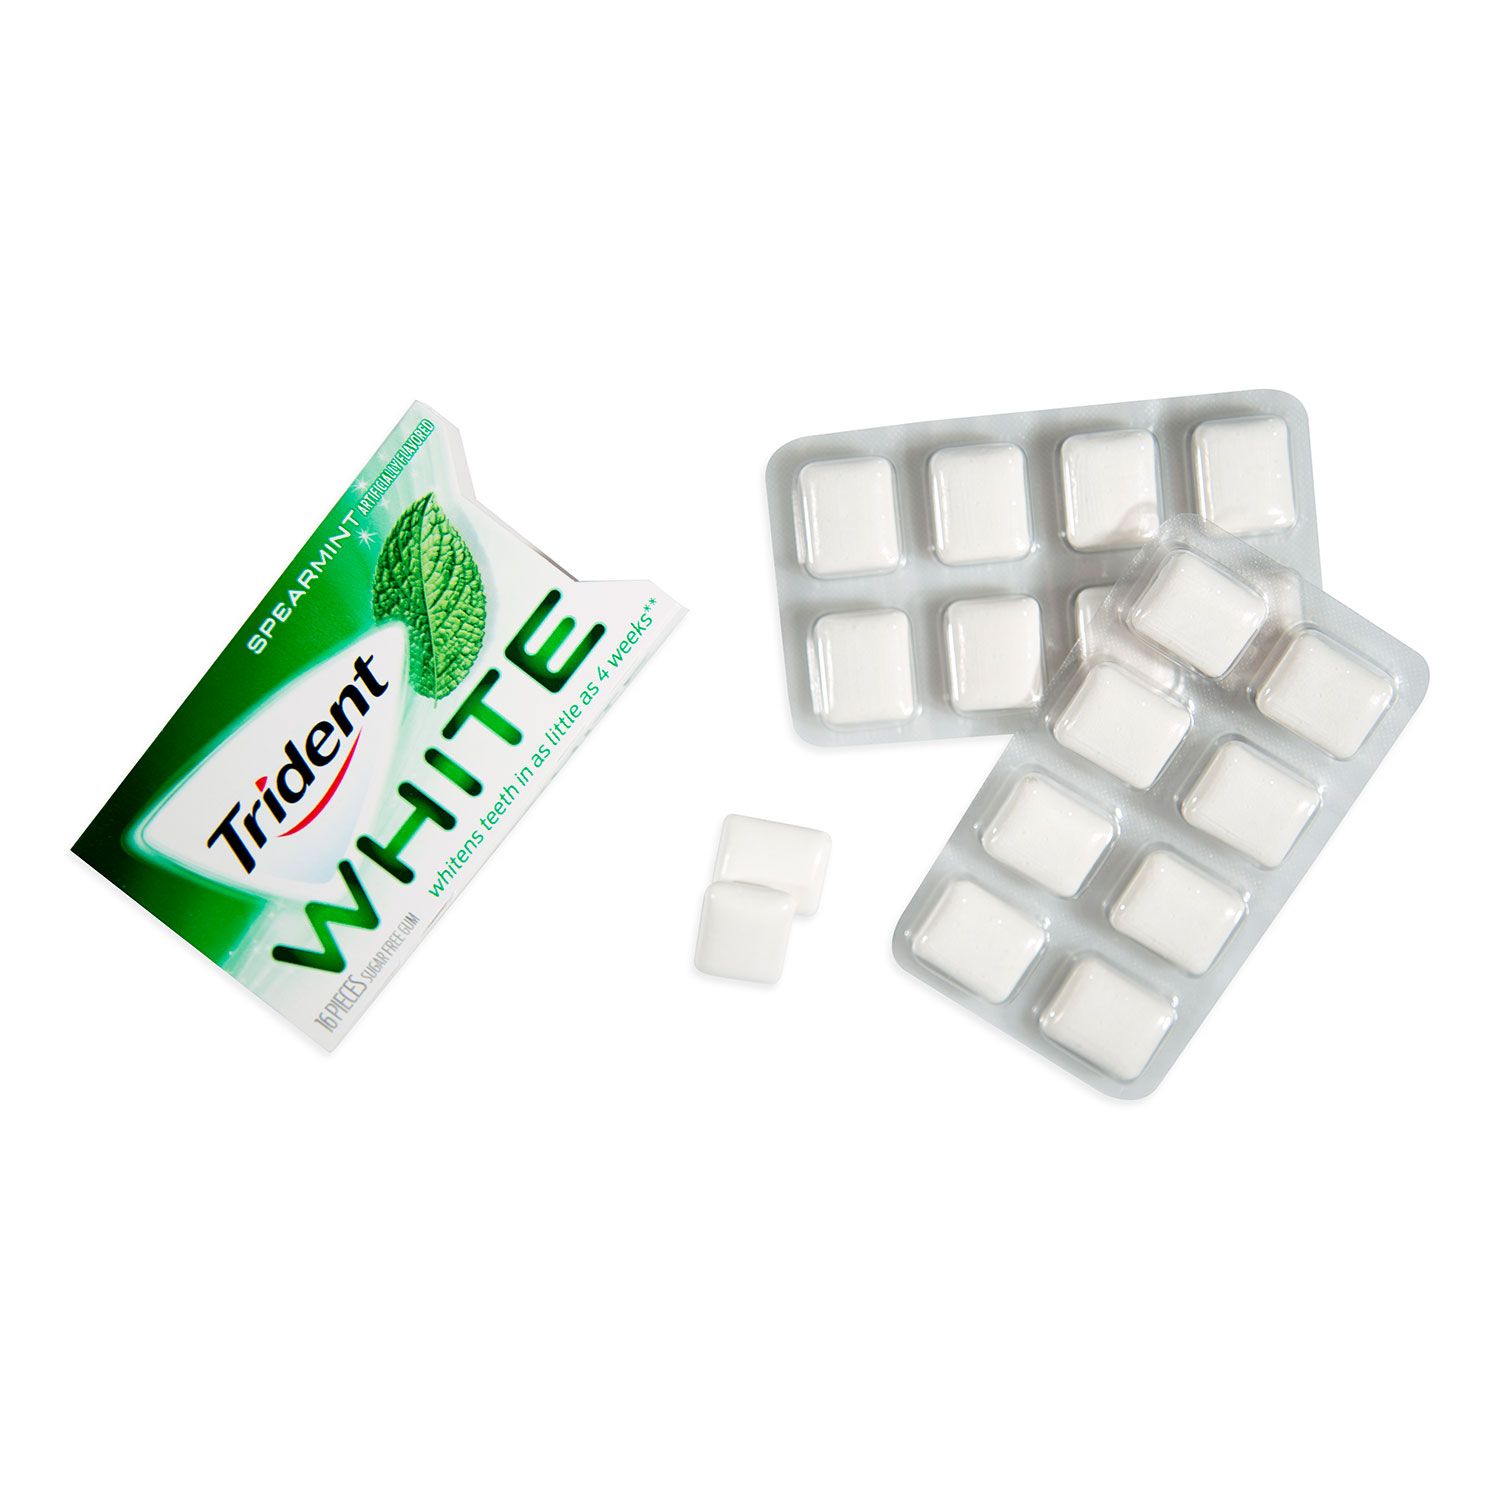 Trident White Dual Pack Sugar Free Gum Spearmint Artificially Flavored - 12 Pack - image 3 of 3